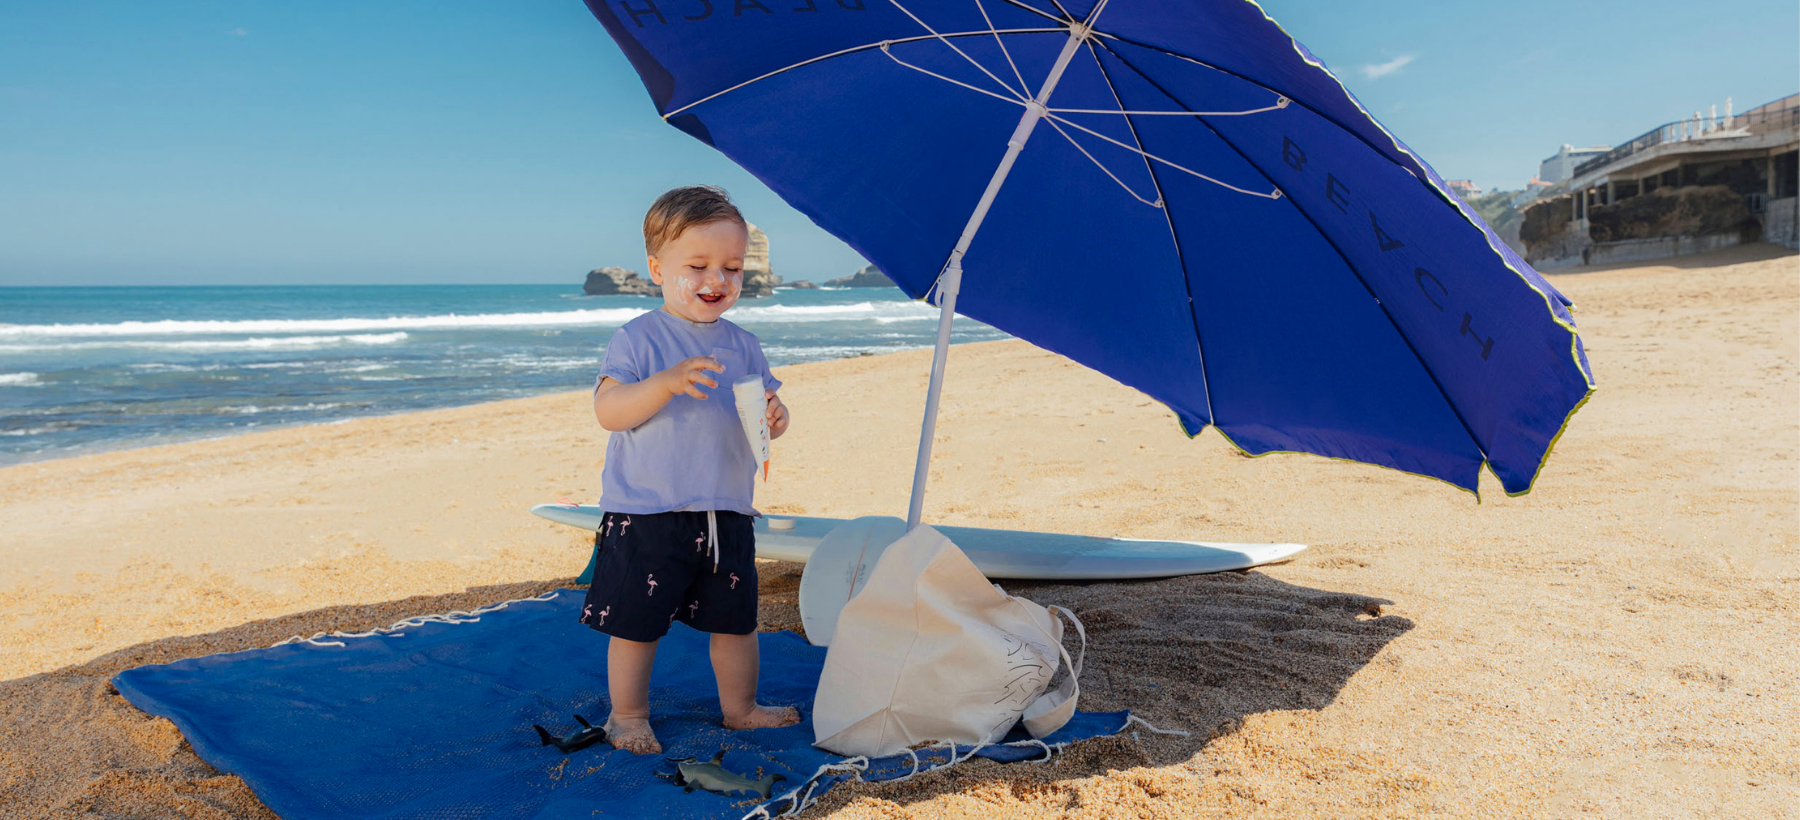 Choosing the right Sunscreen for your baby